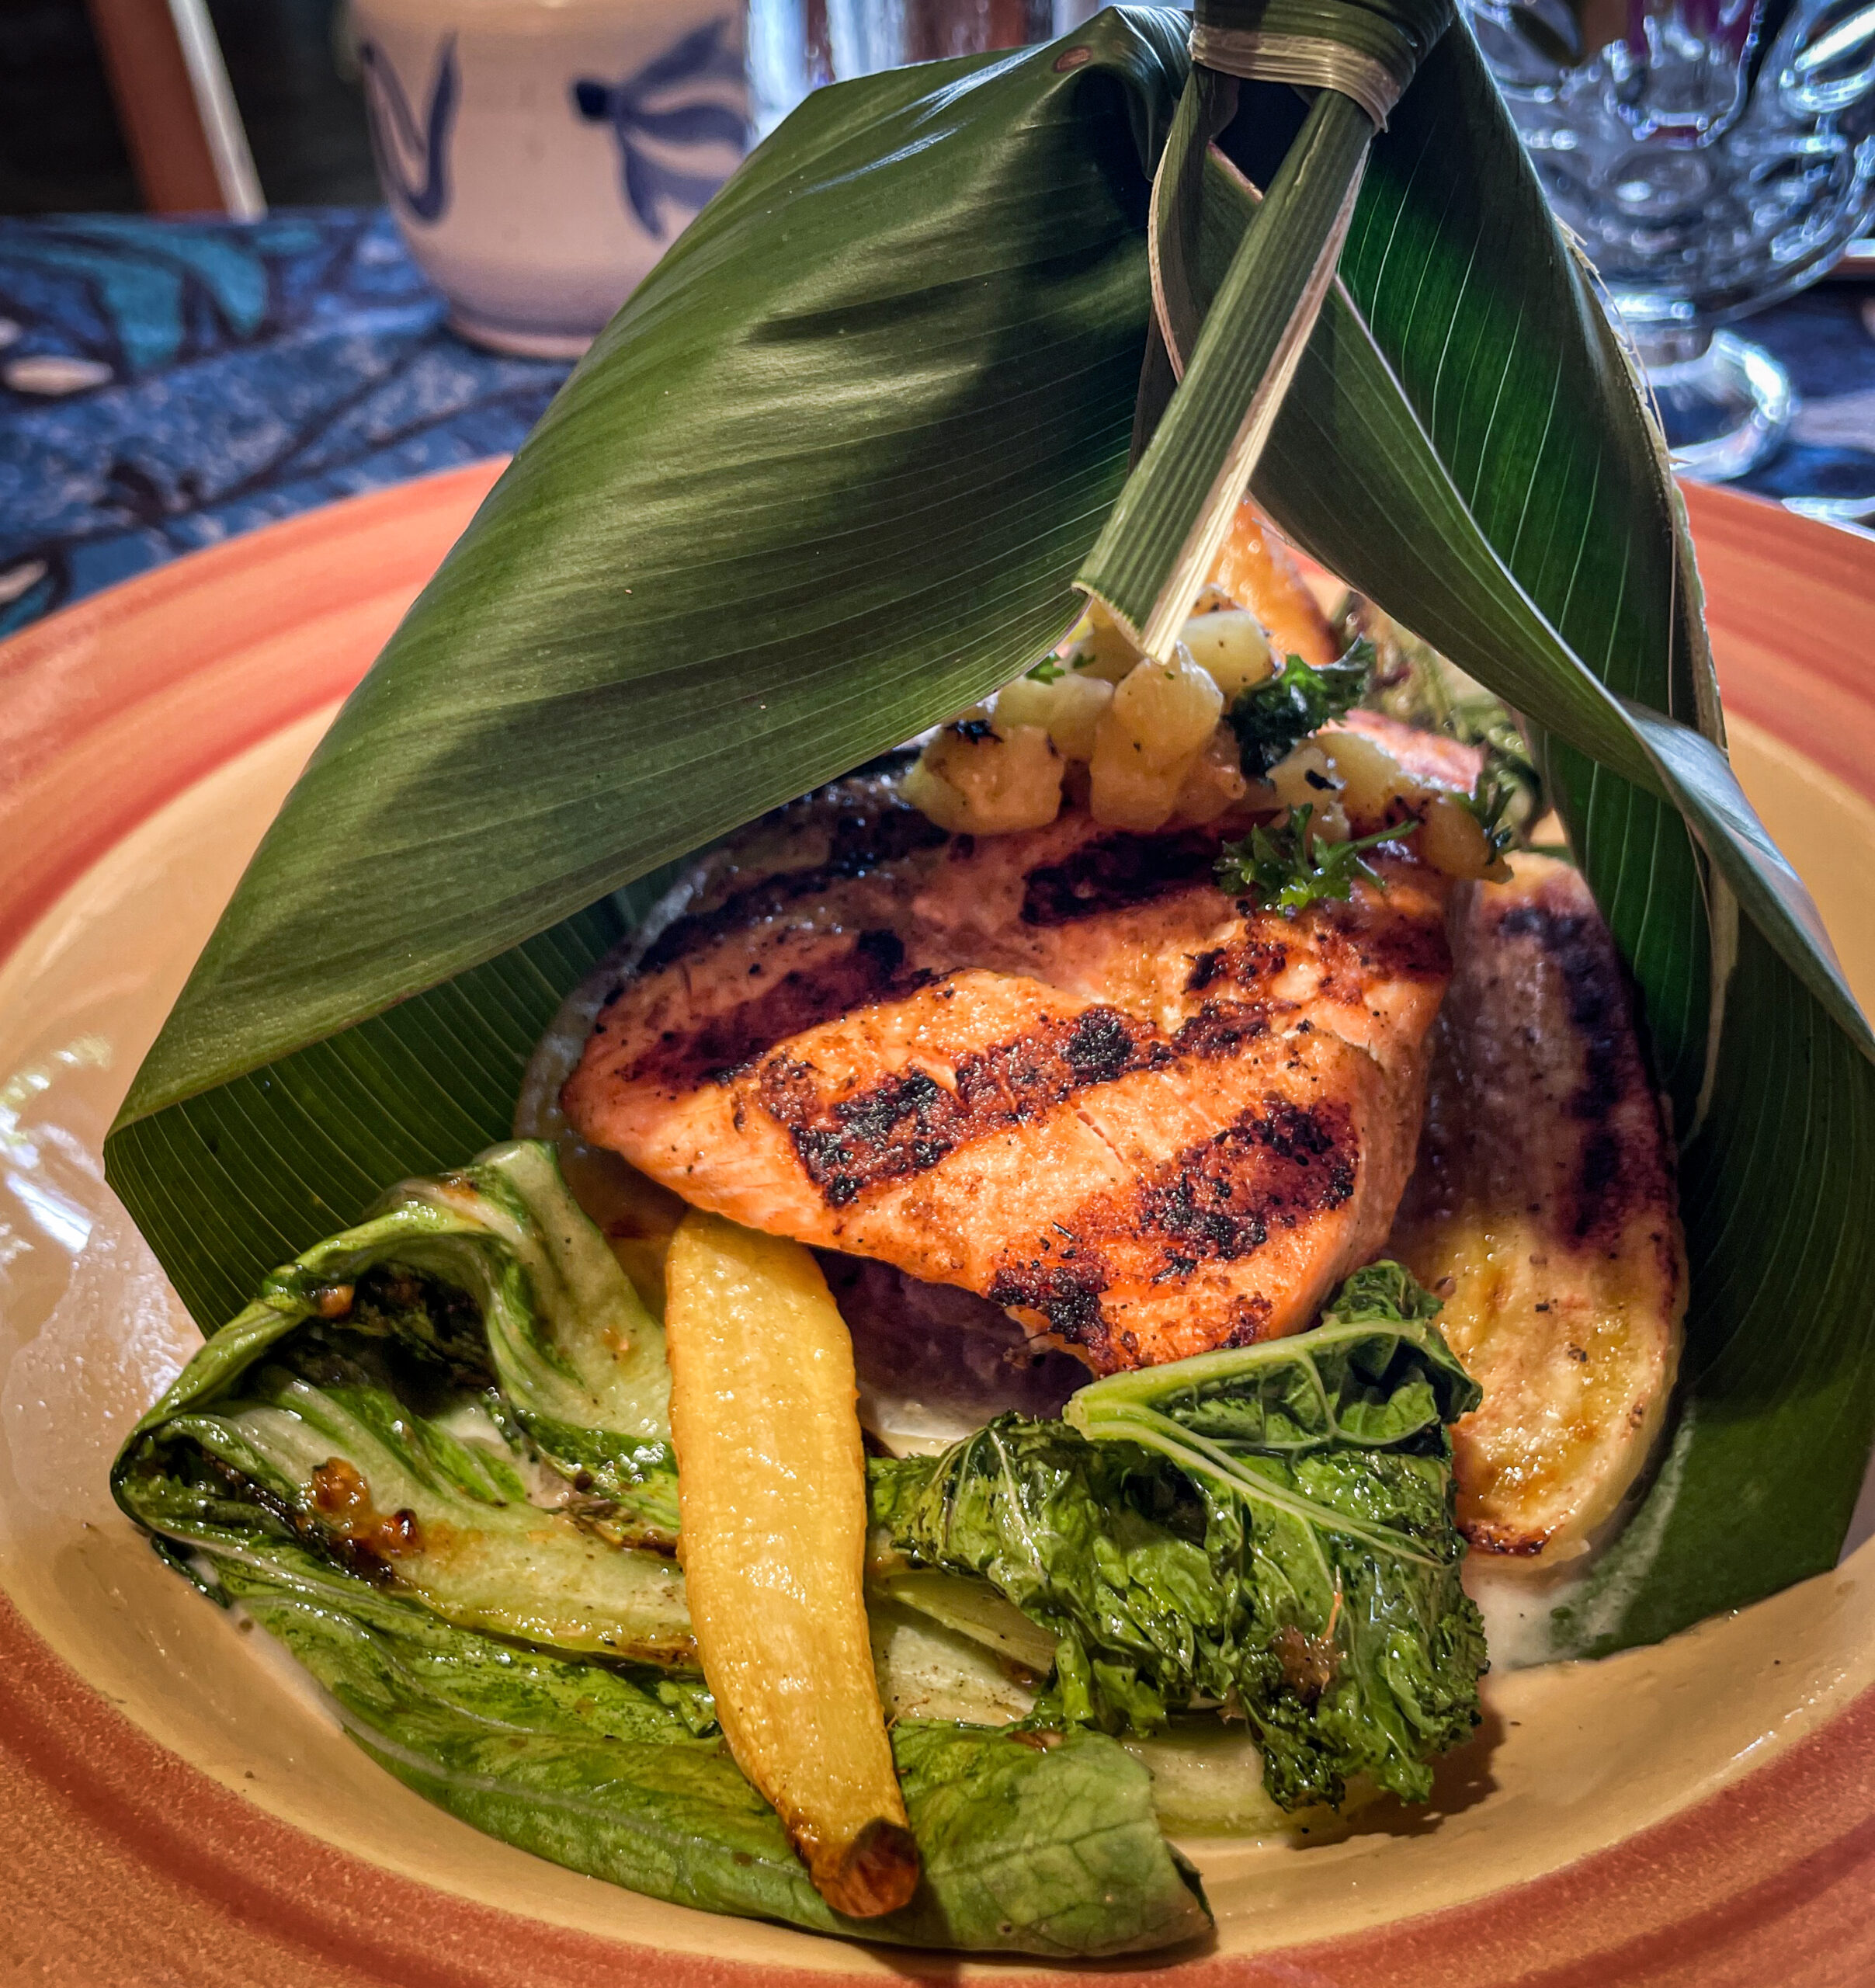 New Zealand Salmon with Banana and Charred Maui Gold Pineapple from Mama's Fish House in Maui, Hawaii.